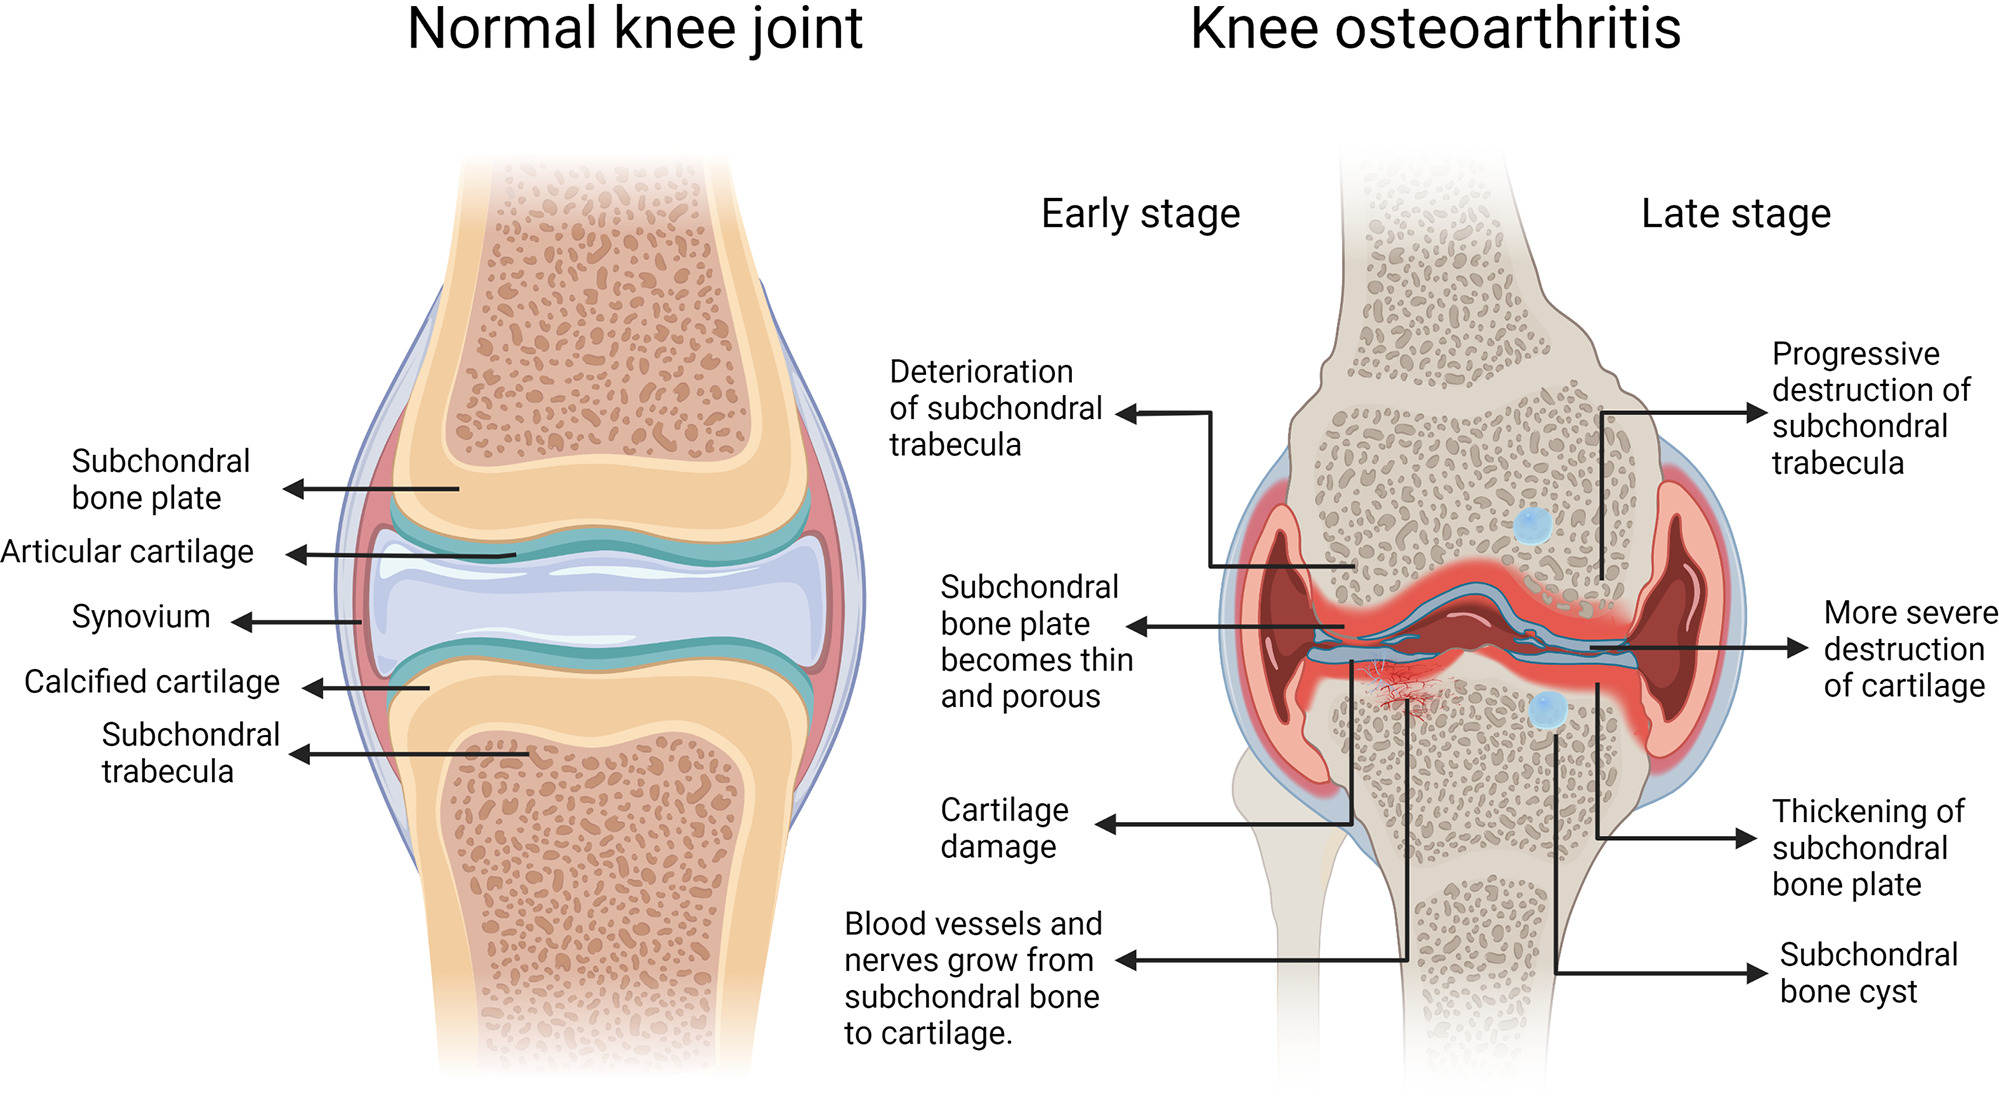 Fig. 1 
          Subchondral bone (SB) in normal joints and osteoarthritis (OA). Normal knee joints include cartilage, synovium, and SB. SB also includes subchondral bone plate (SBP) and subchondral trabecula. In early OA, the SBP becomes thinner and porous. Cartilage and SB trabeculae deteriorated. At the same time, blood vessels and nerves grow from subchondral bone to cartilage. In late OA, calcified cartilage appears in the articular cartilage area and the SBP thickens. At the same time, subchondral trabecular sclerosis and progressive cartilage destruction lead to bone cyst-like lesions.
        